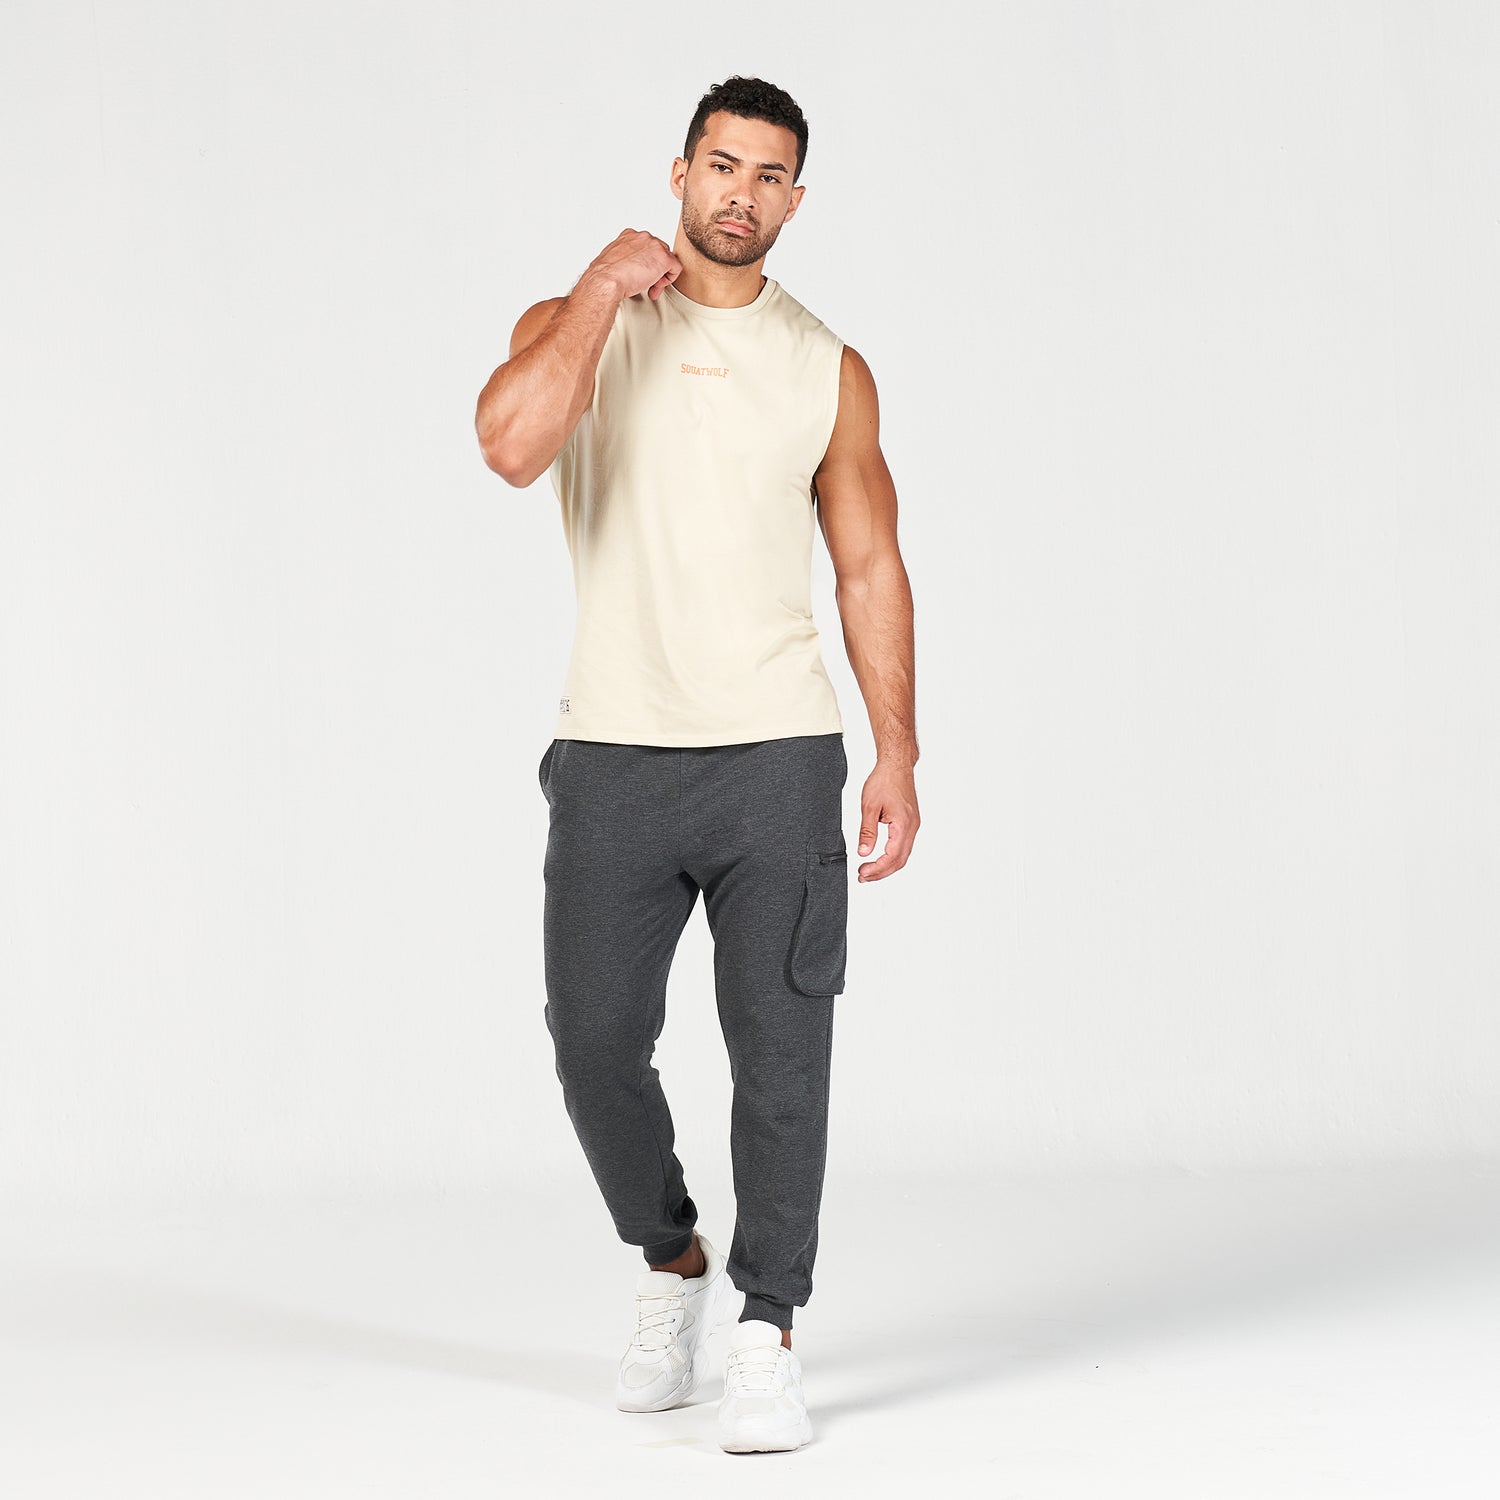 squatwolf-gym-wear-golden-era-young-retro-tank-brown-rice-workout-tank-tops-for-men